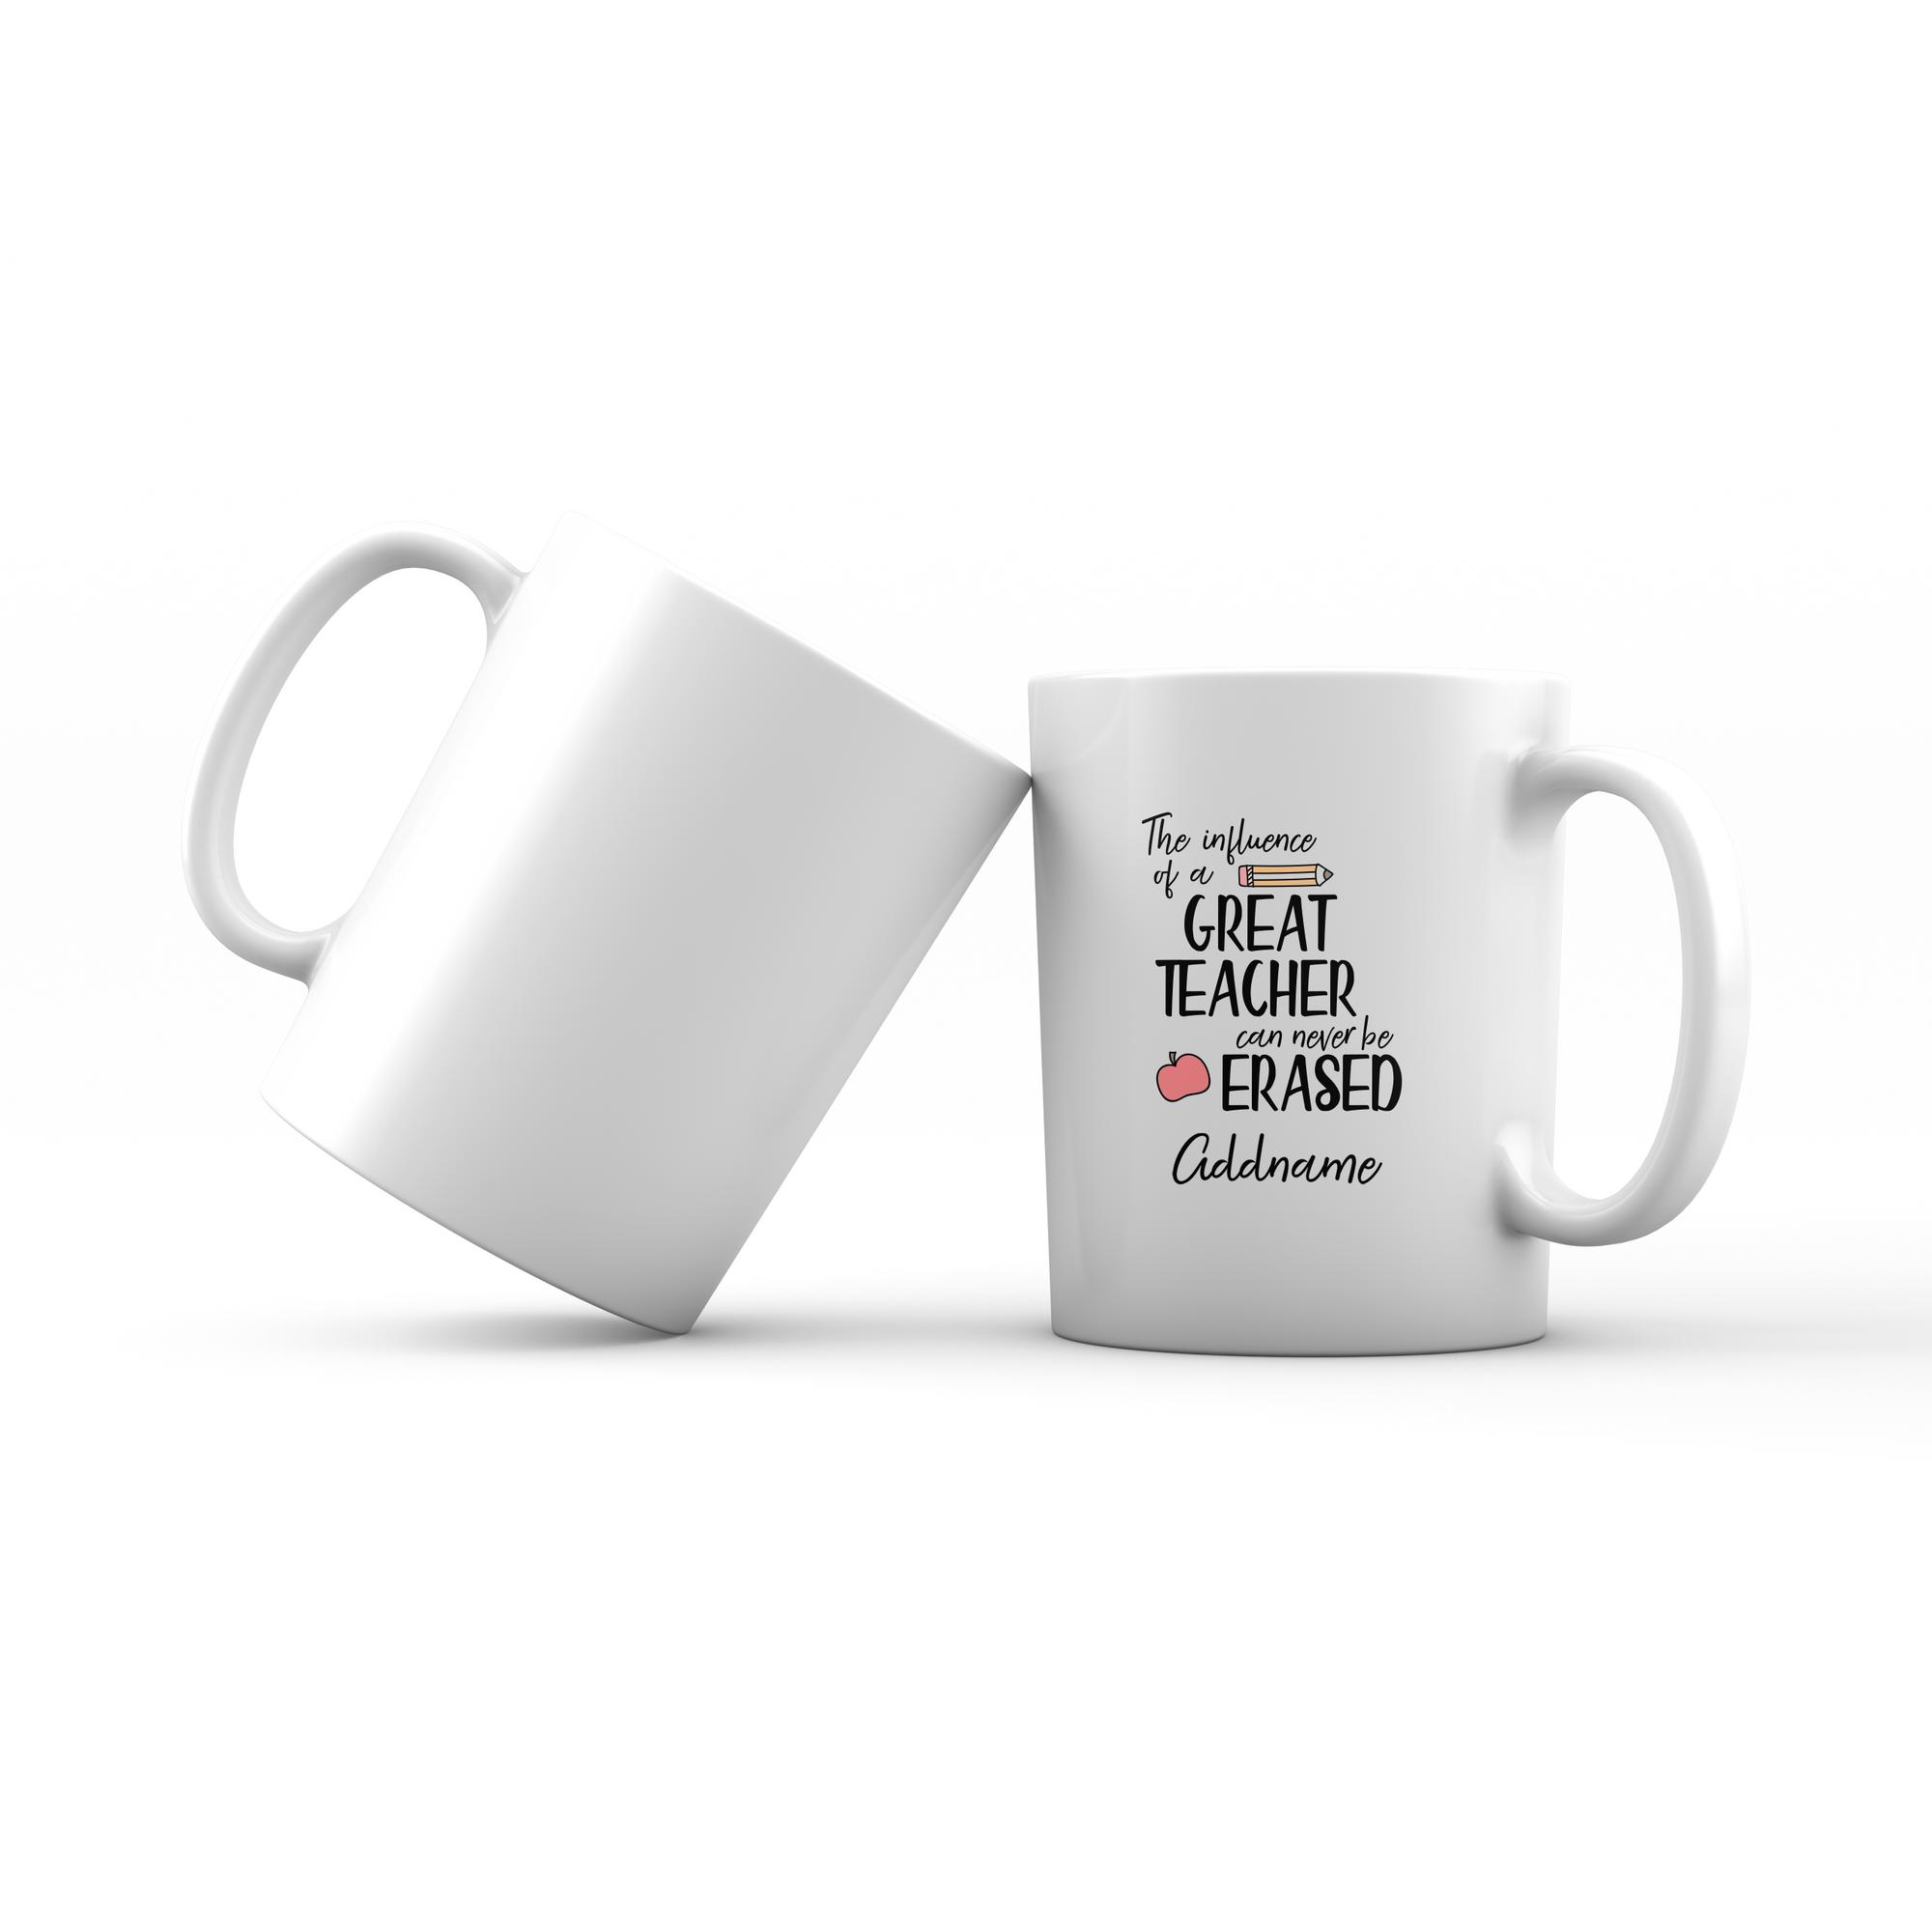 Teacher Quotes The Influence Of A Great Teacher Can Never Be Erased Addname Mug